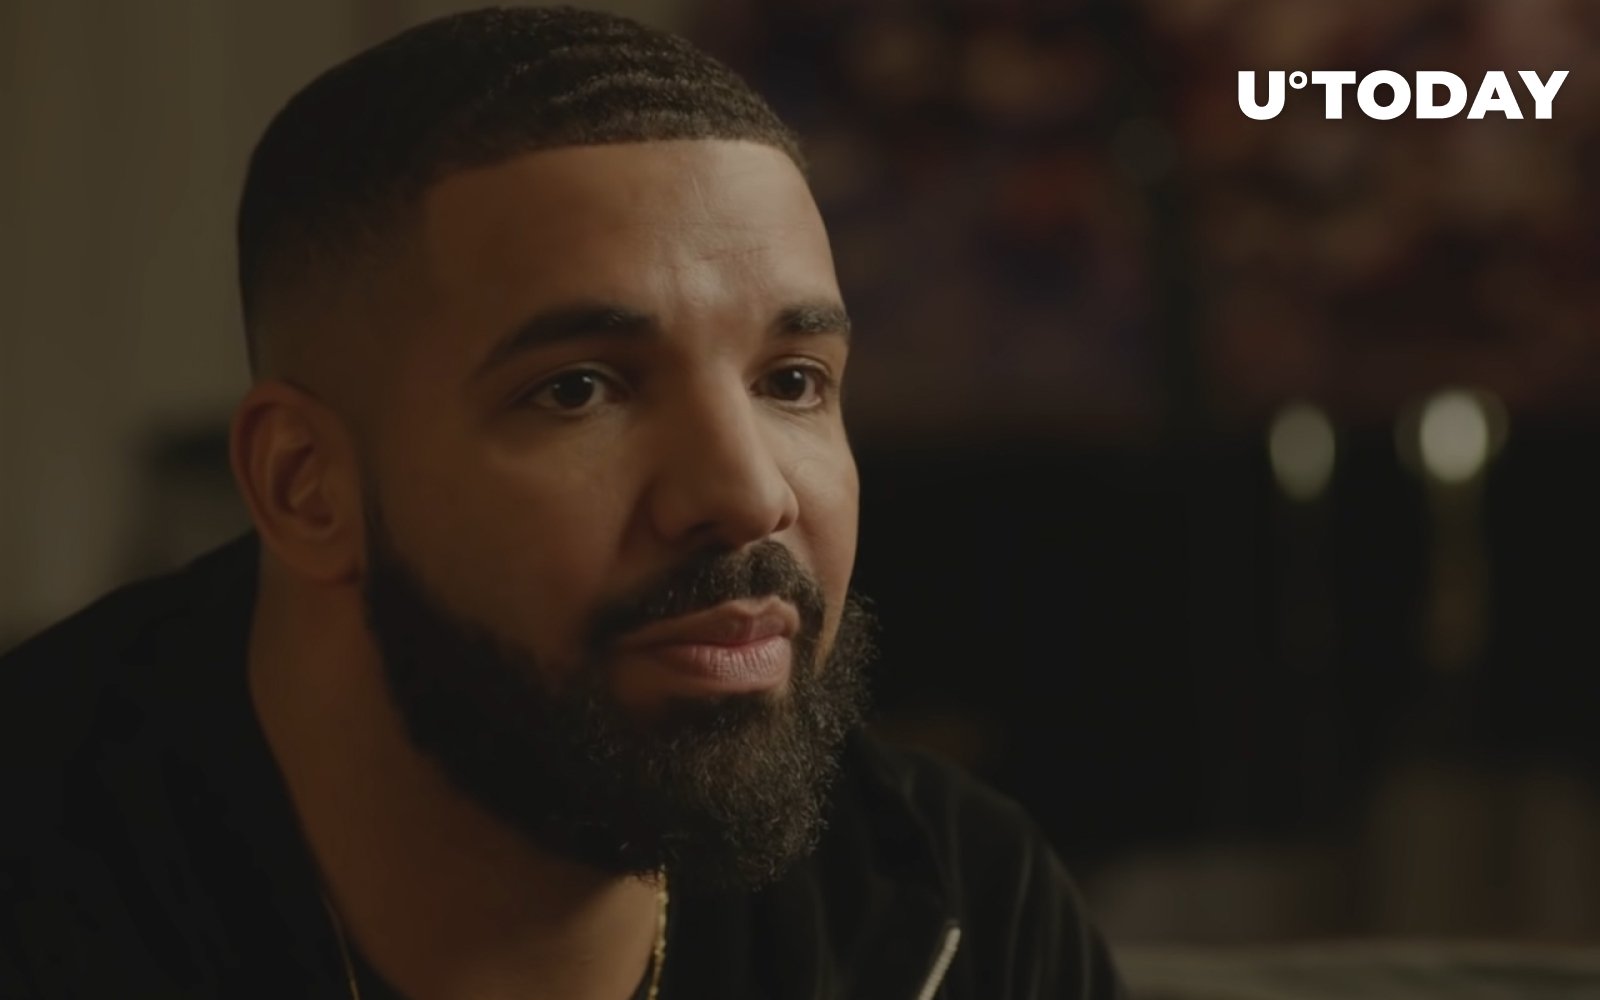 Drake Won TWO Of His Huge Bitcoin Super Bowl Bets, He Made